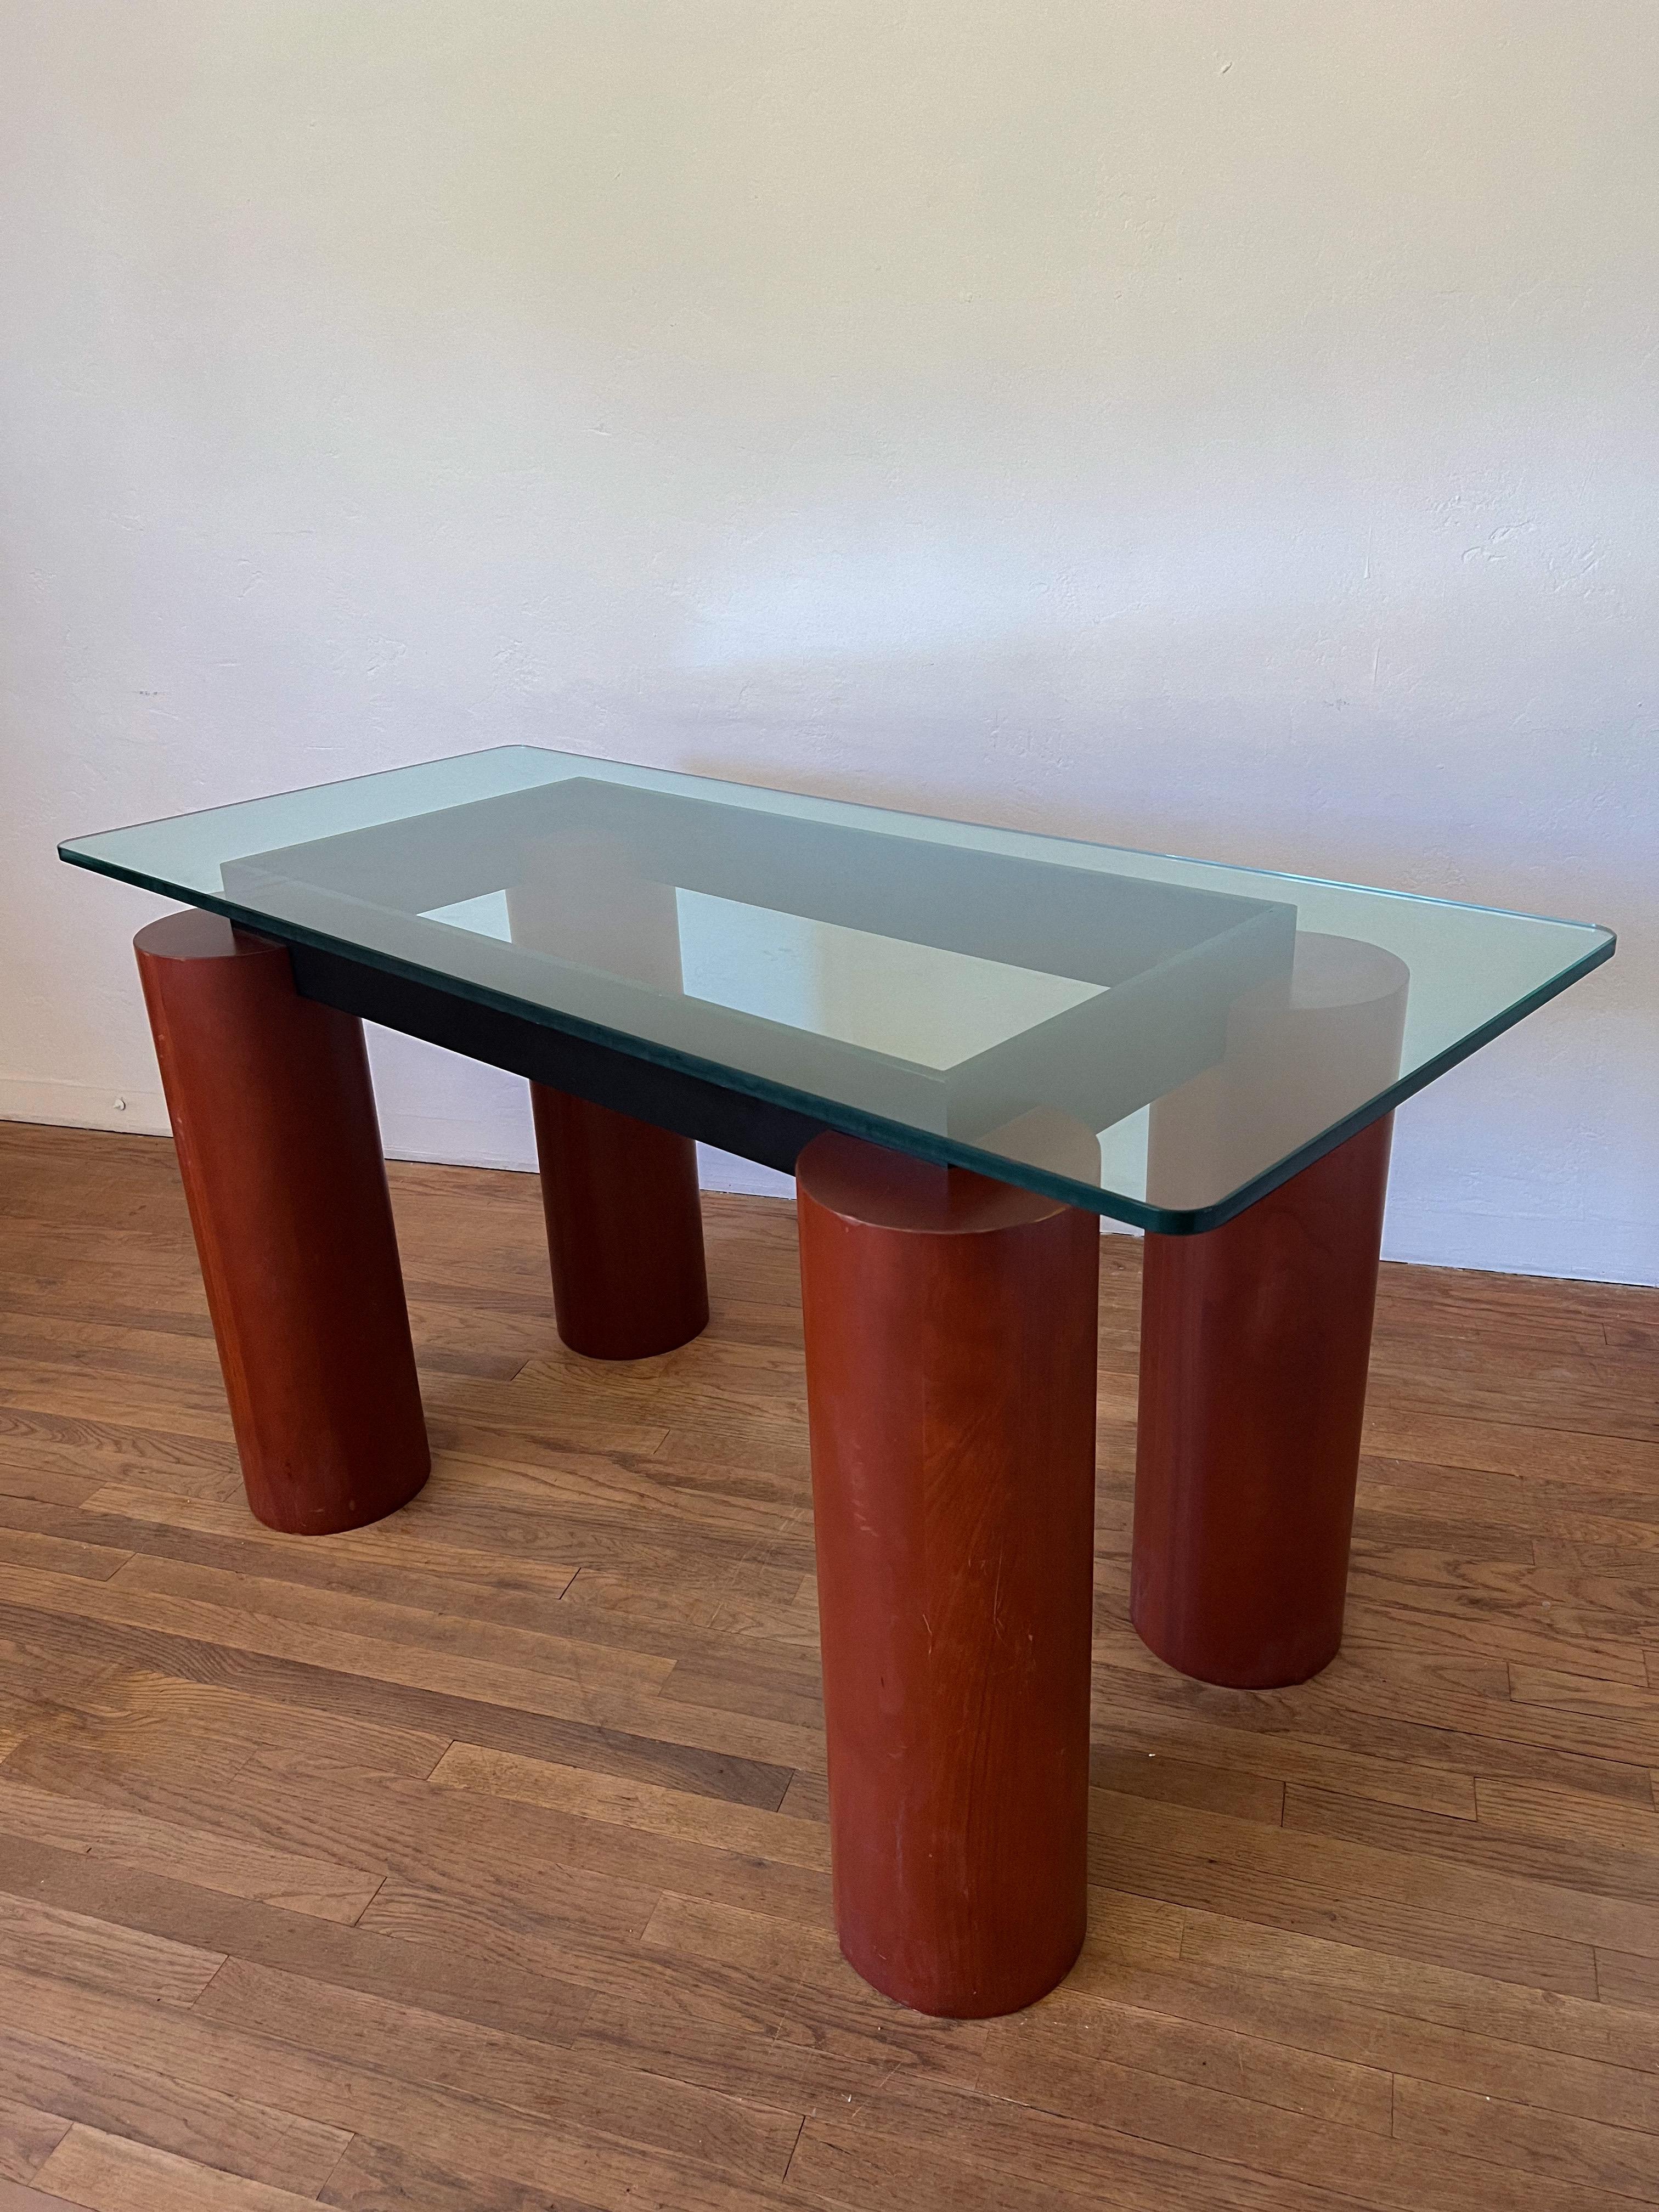 Late 20th Century Postmodern Console Table in the Style of Lela & Massimo Vignelli’s “Serenissimo” For Sale